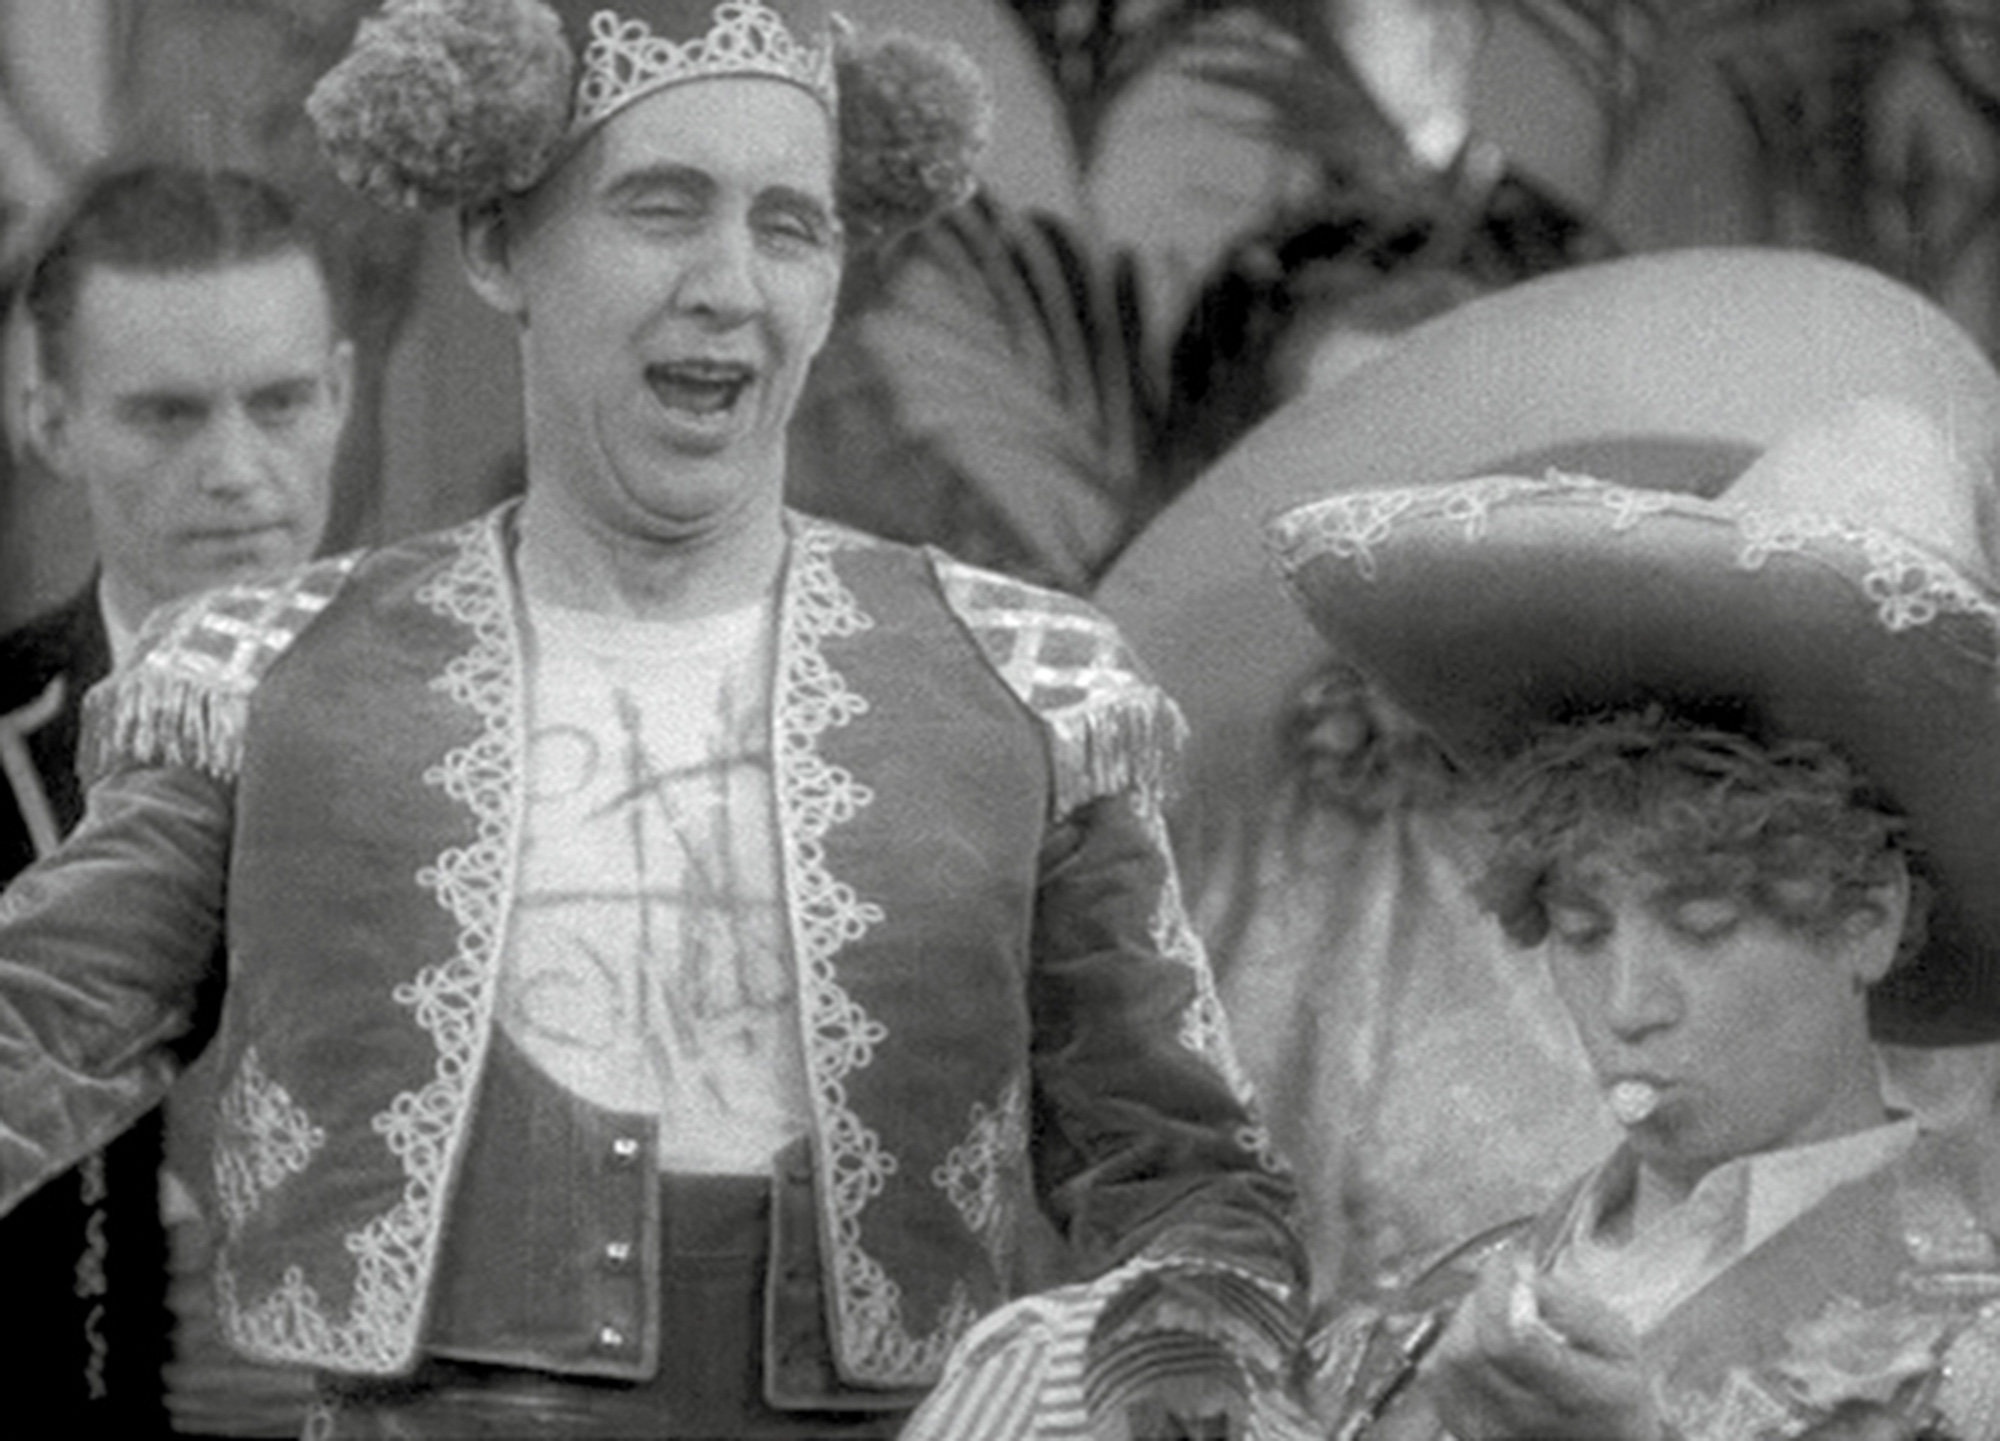 A still from the nineteen twenty nine film “The Cocoanuts” depicting Harpo Marx chewing bubble gum.